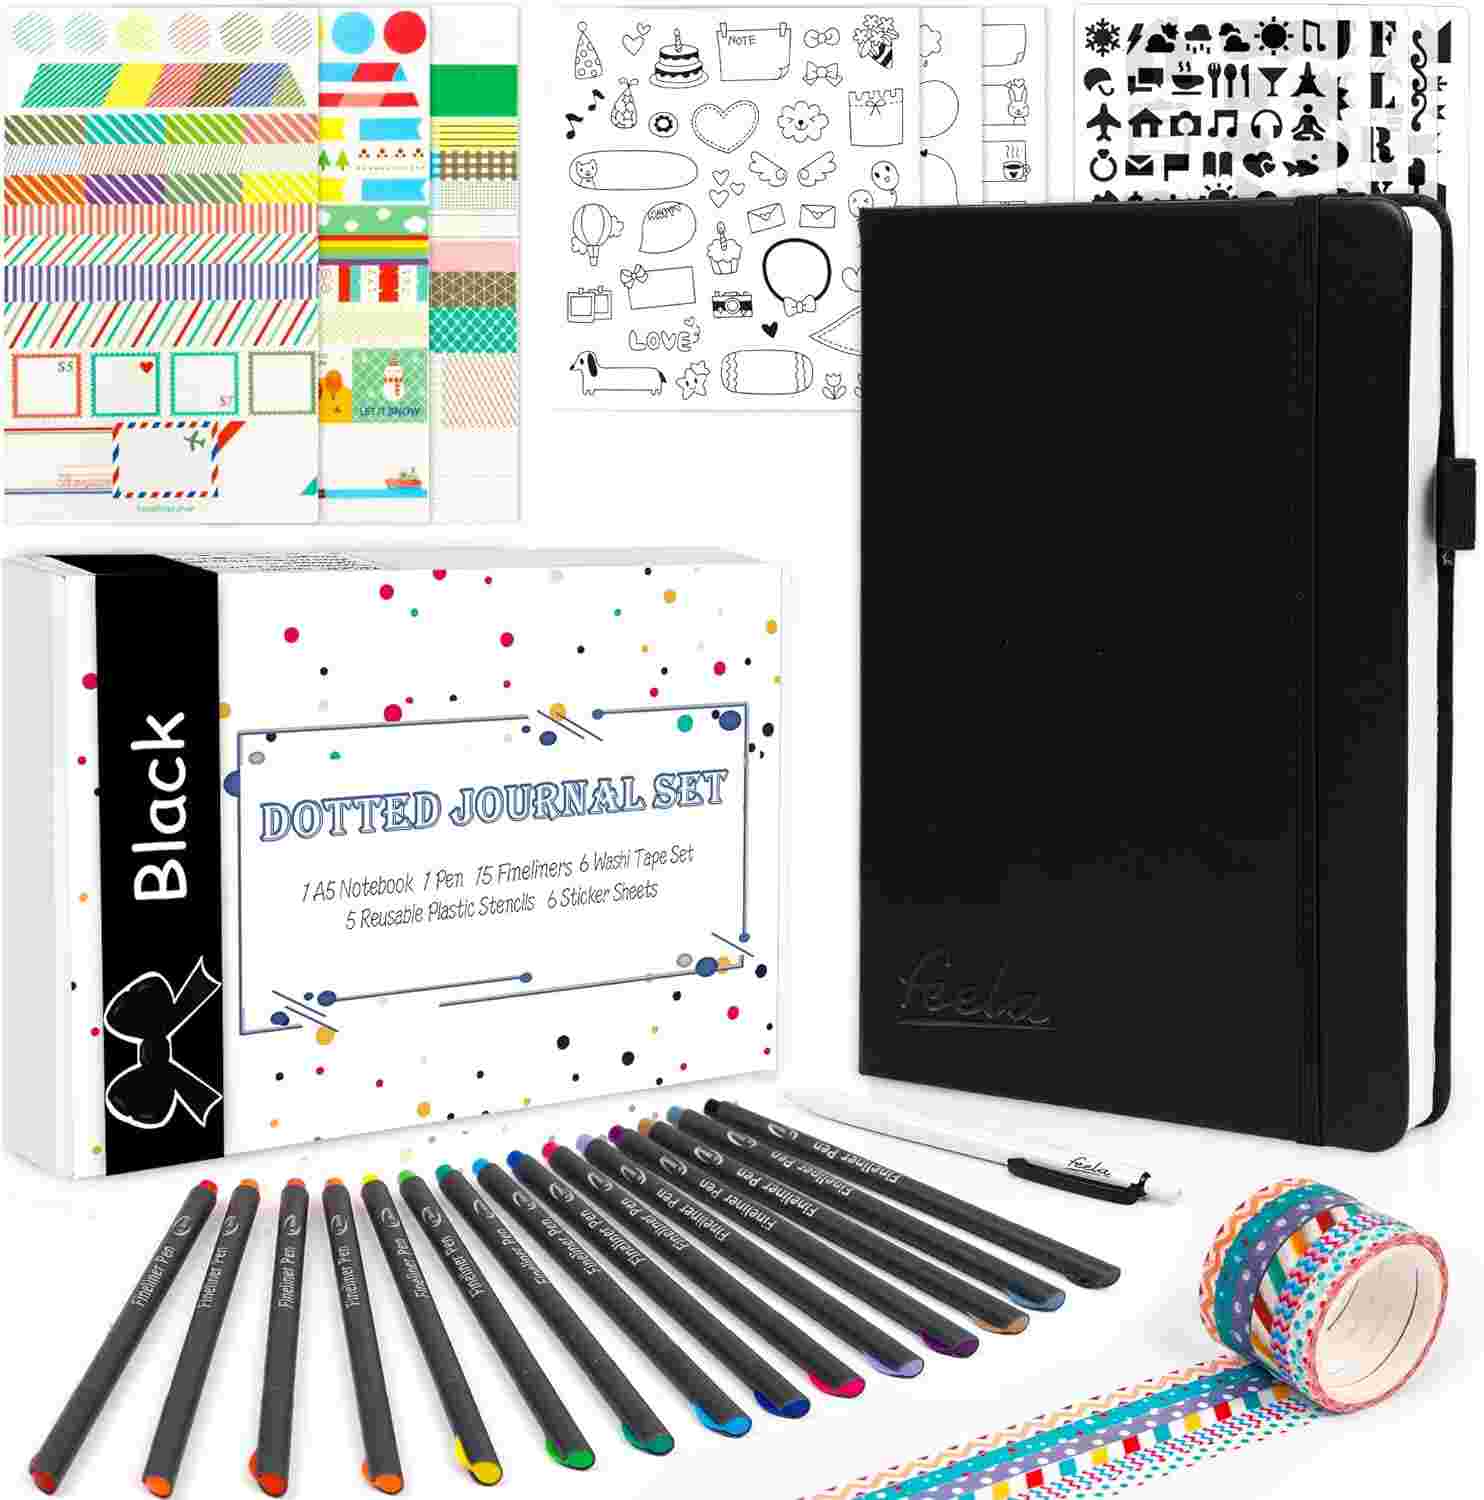 Dotted Journal Kit, Feela Dot Grid Journal Hardcover Planner Notebook Set For Beginners Women Girls Note Taking with Journaling Supplies Stencils Stickers Pens Accessories, A5, 224 Pages, Black